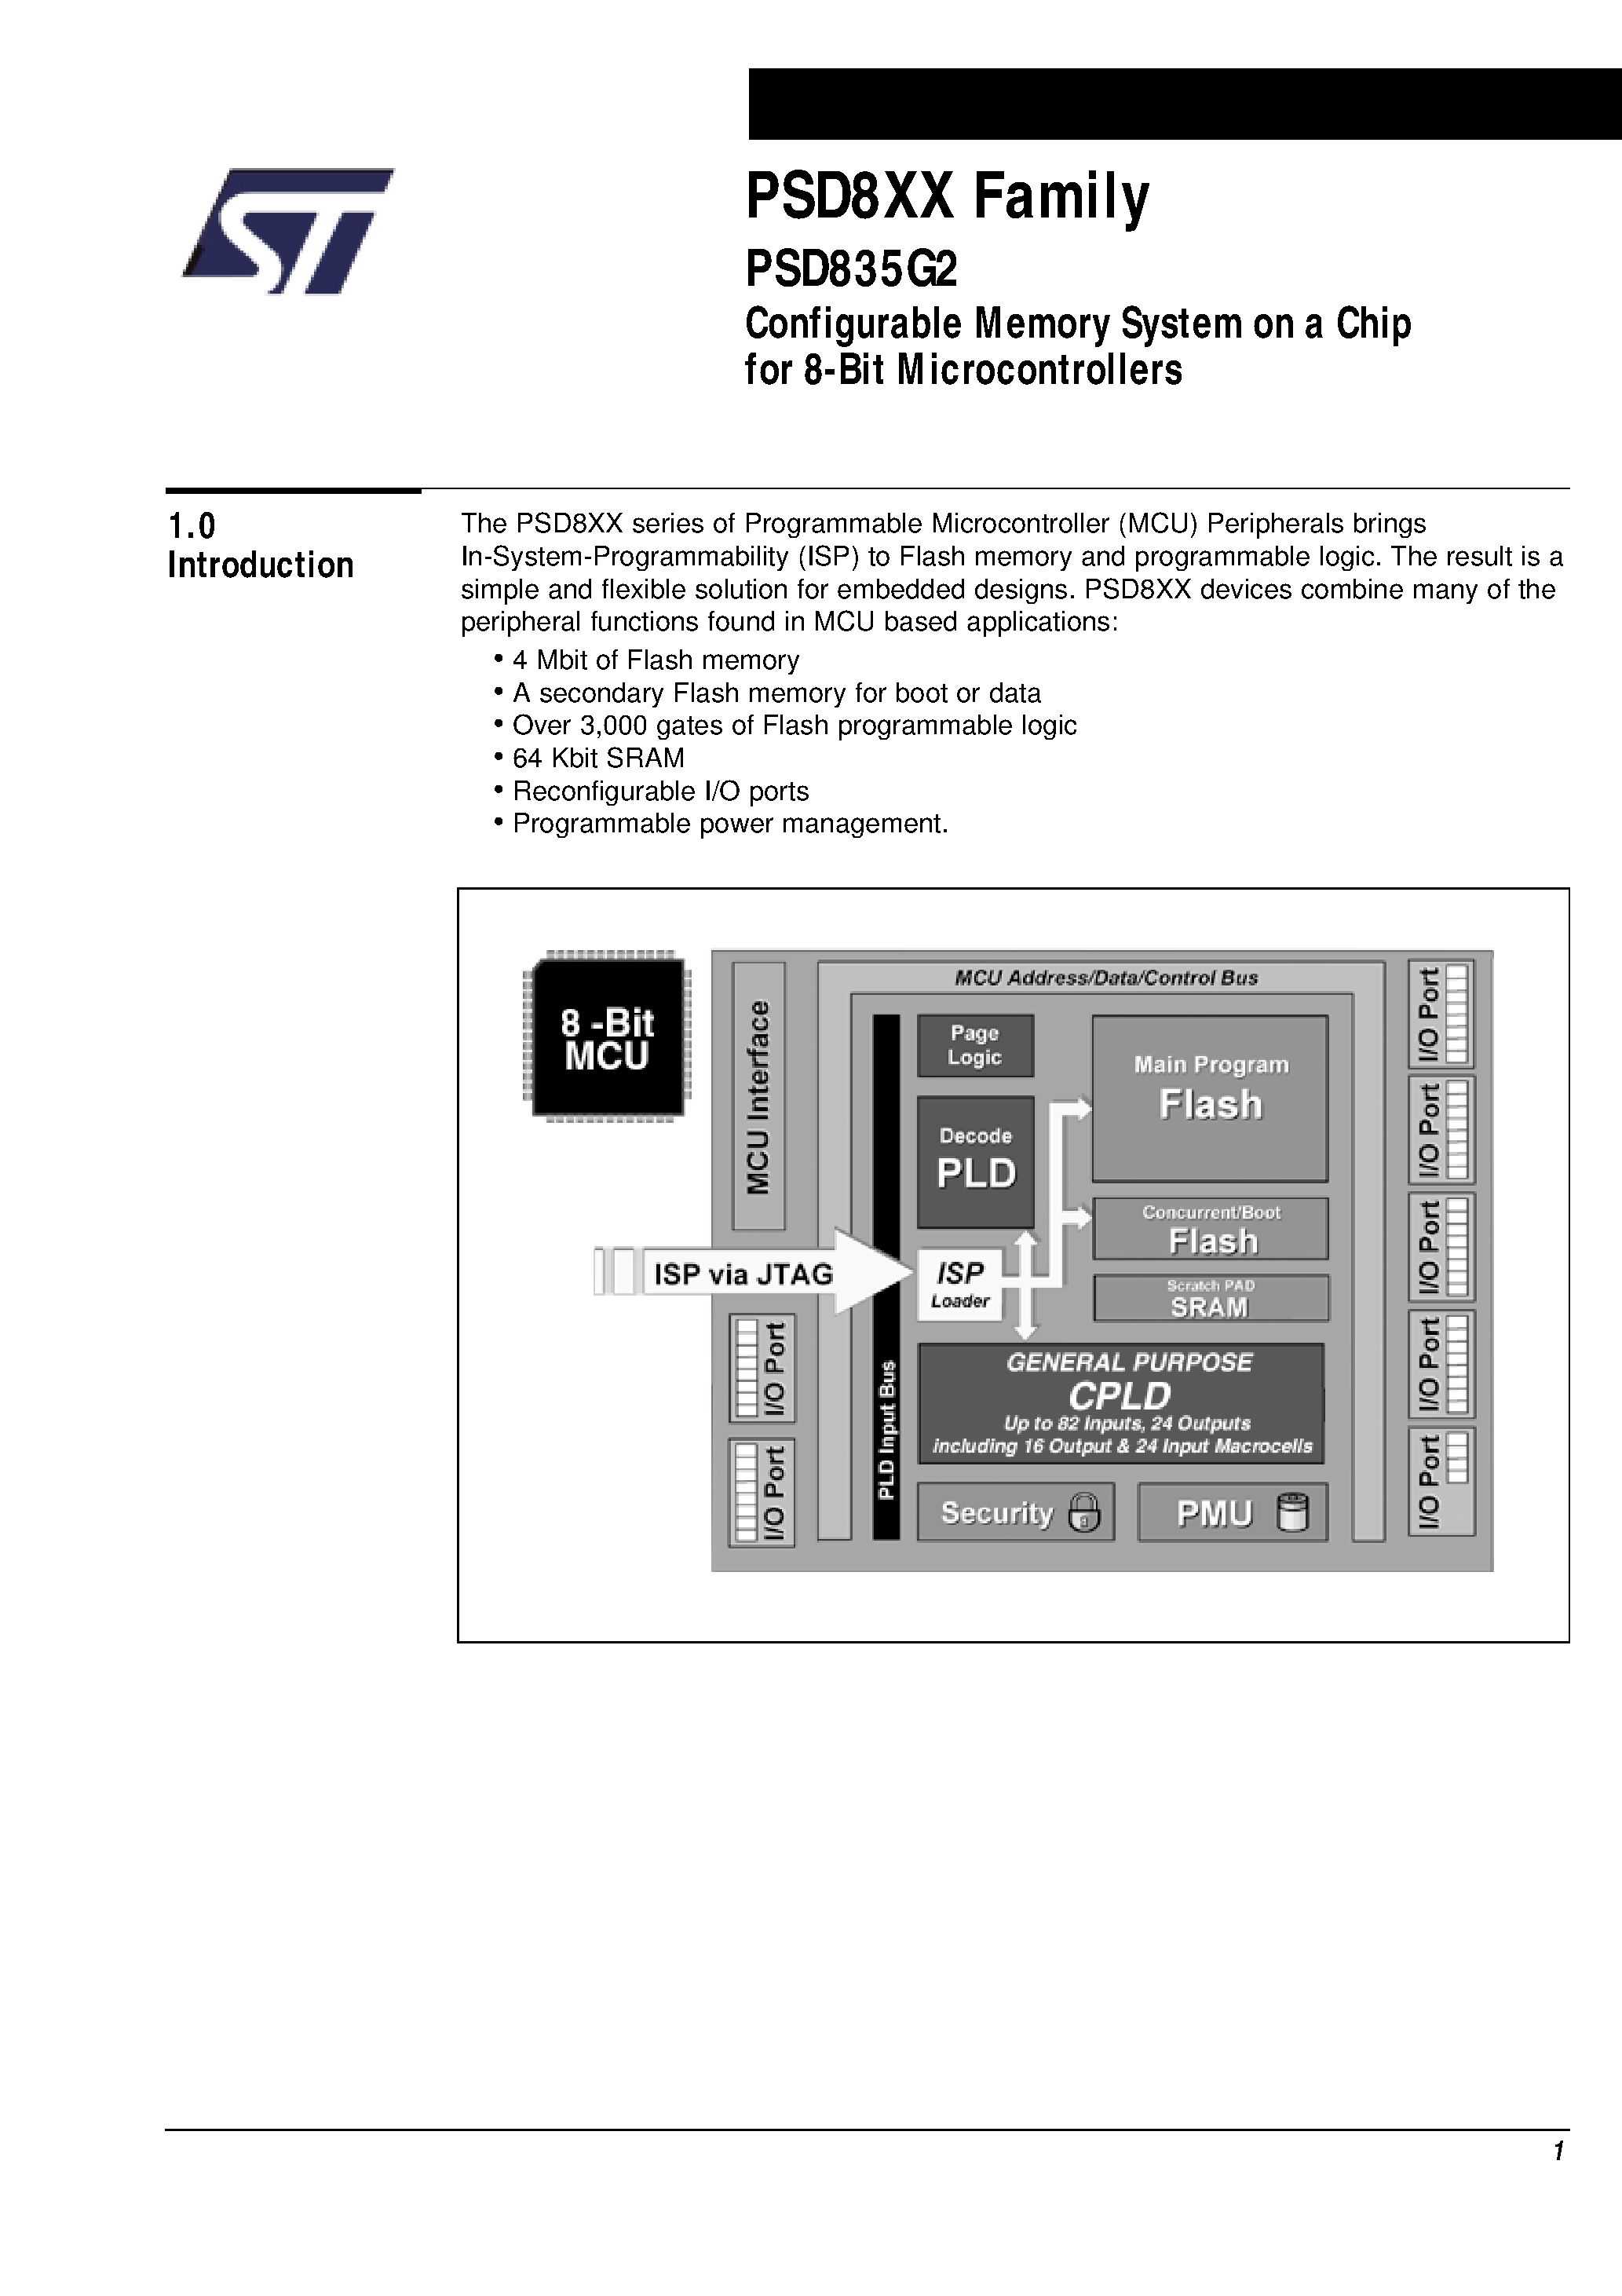 Datasheet PSD835F1-A-70M - Configurable Memory System on a Chip for 8-Bit Microcontrollers page 2